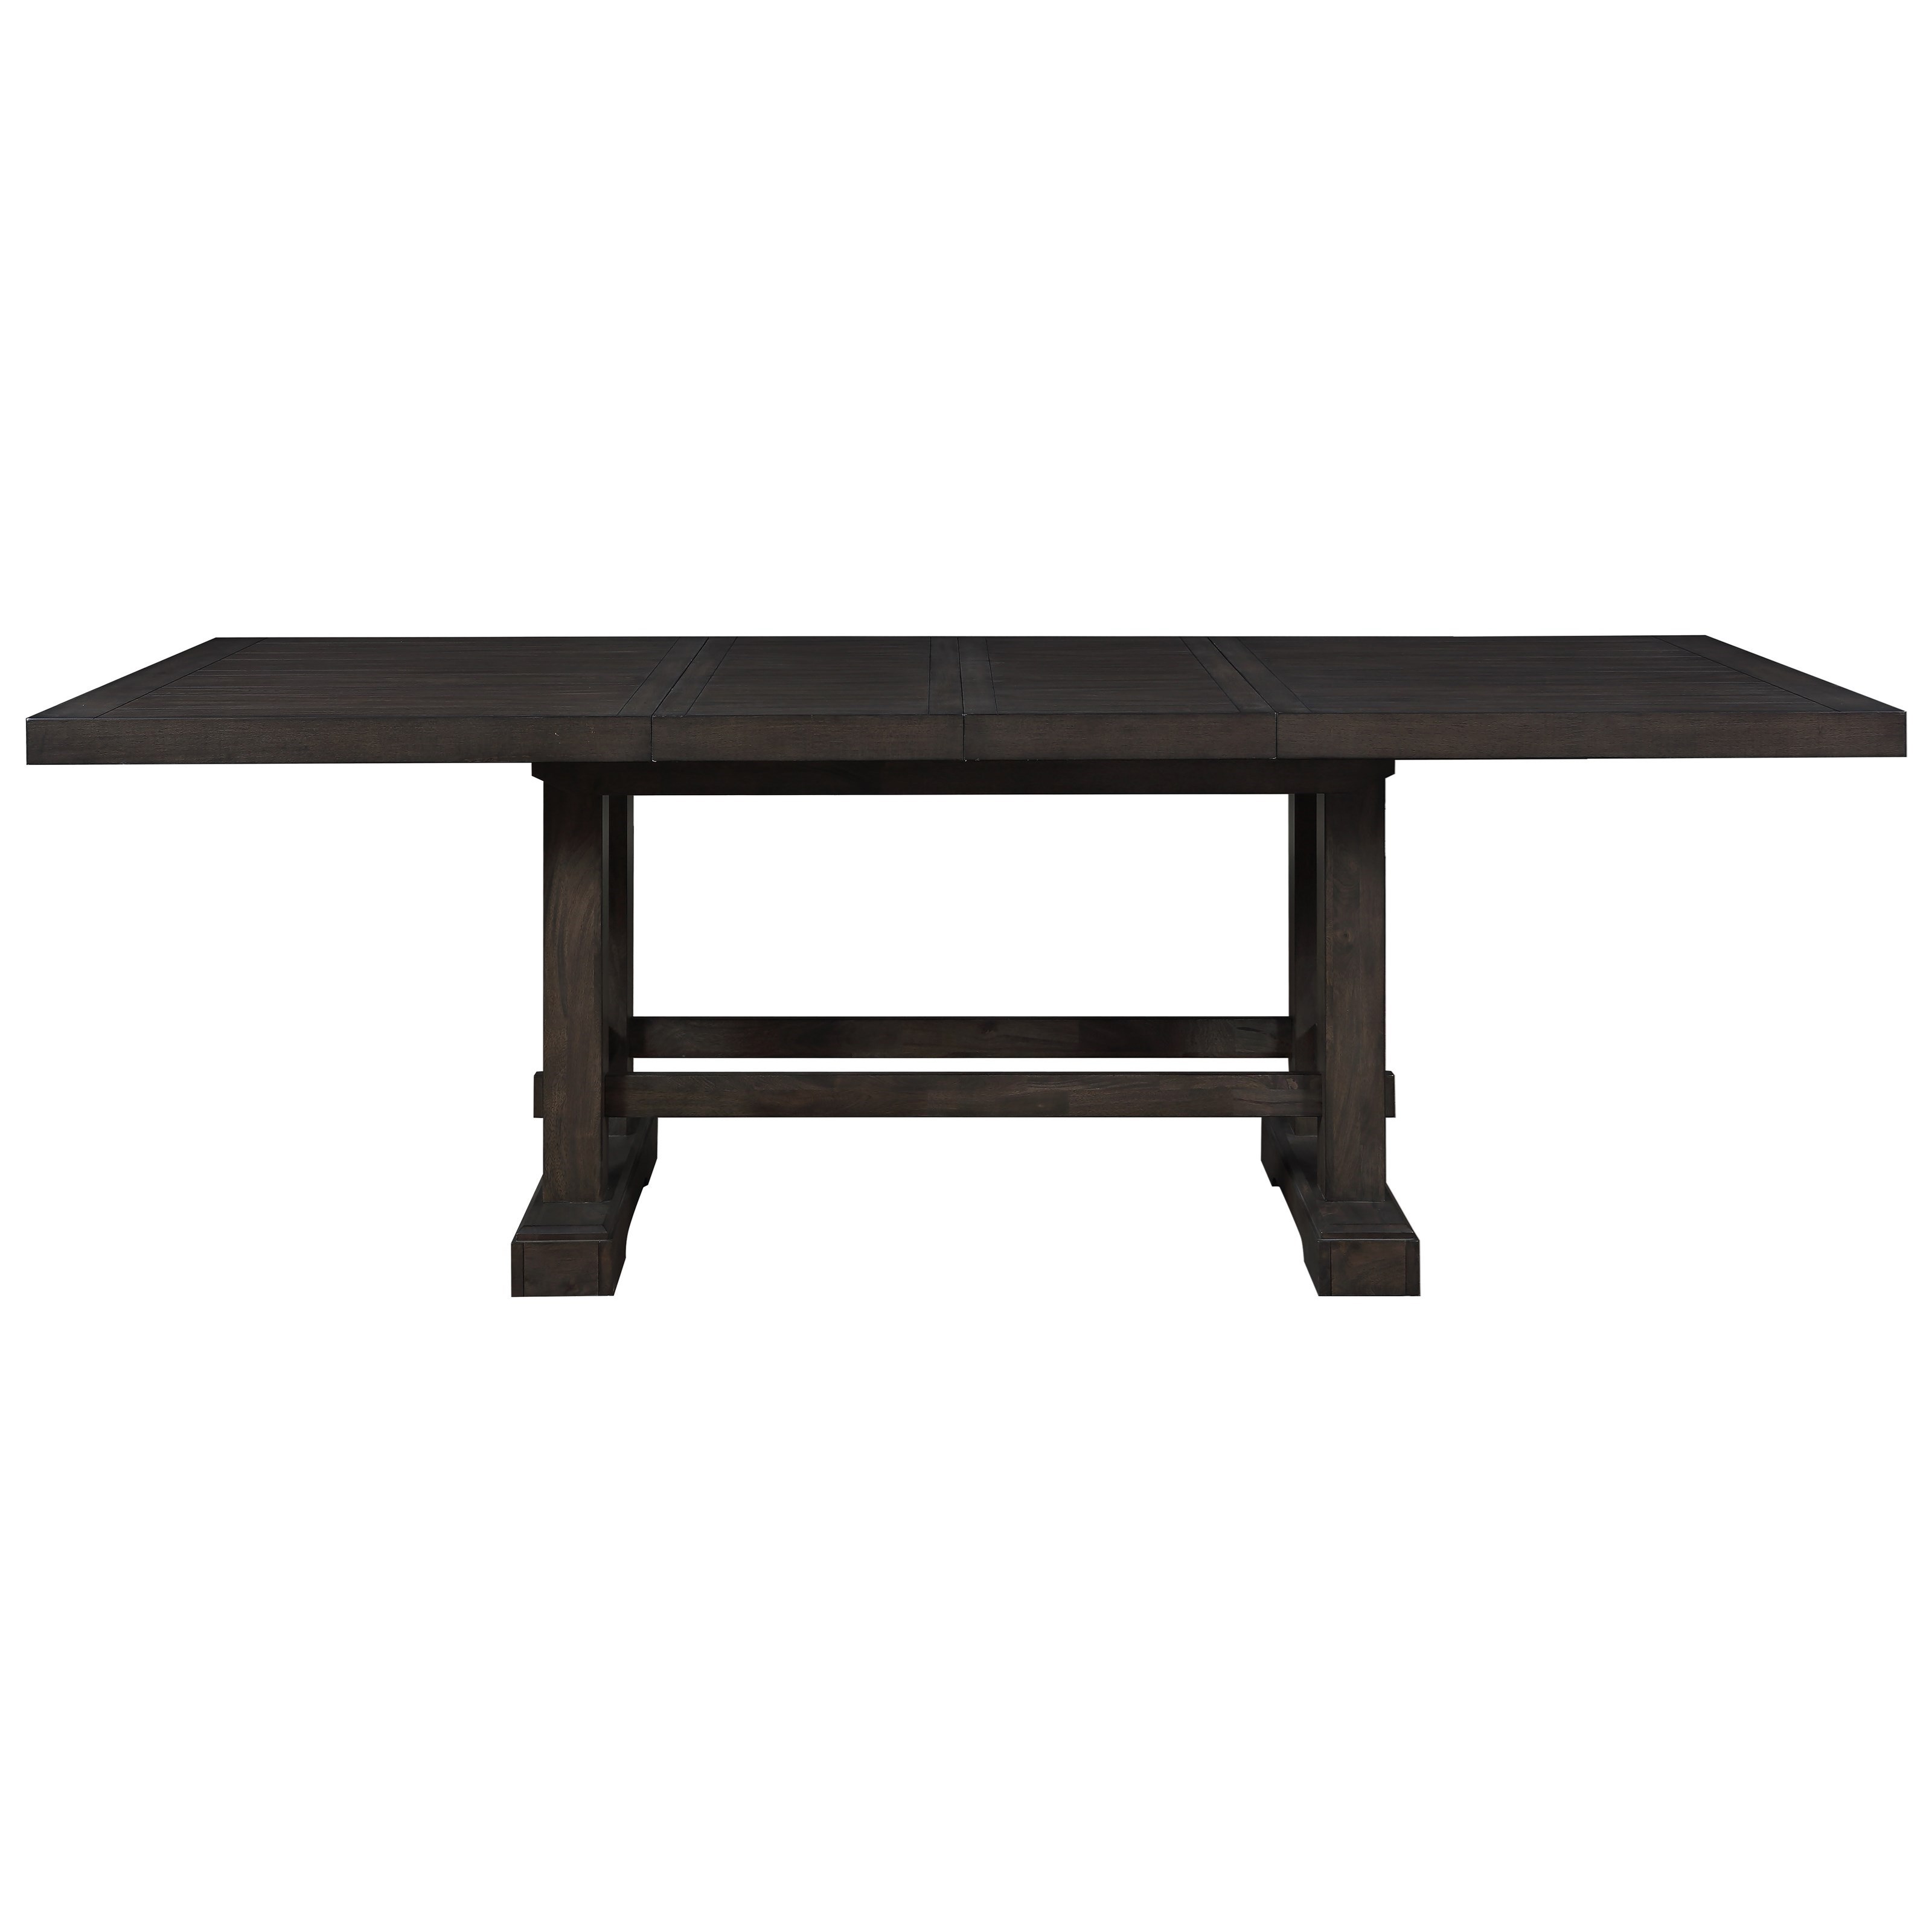 Steve Silver Company Adrian Dining Table